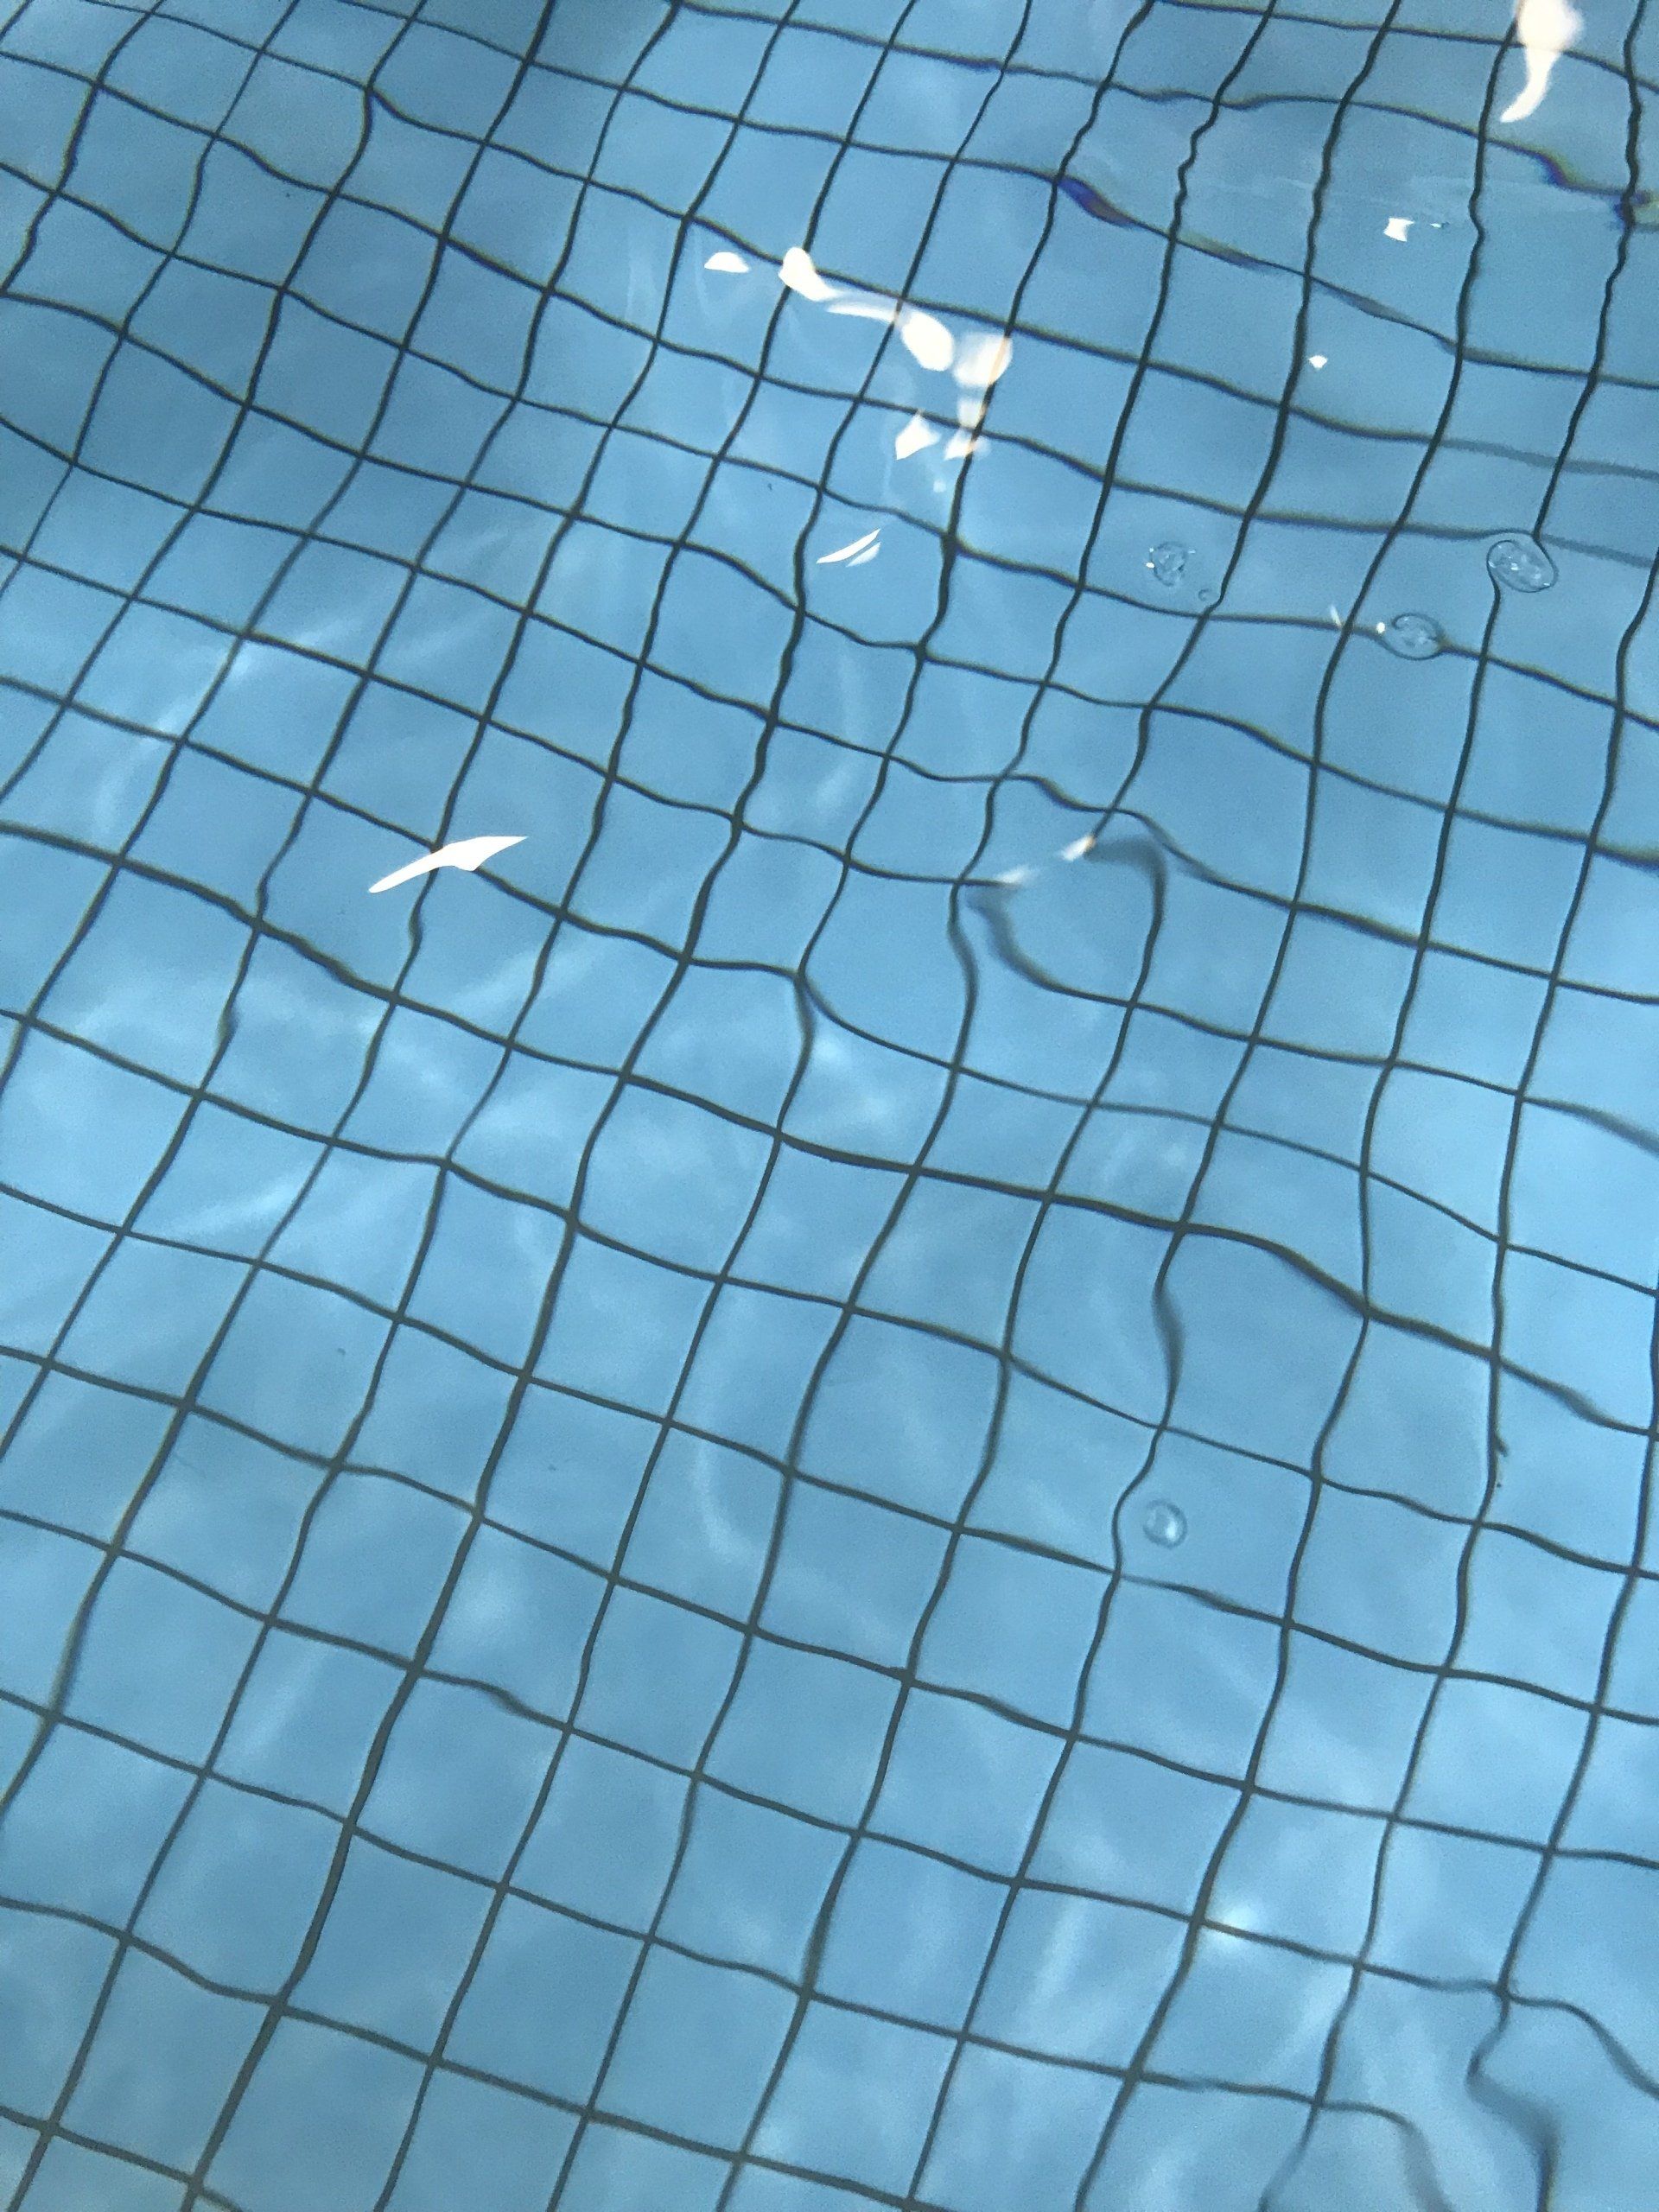 Clear blue pool water reflecting light with a square tile pattern on the bottom of the pool